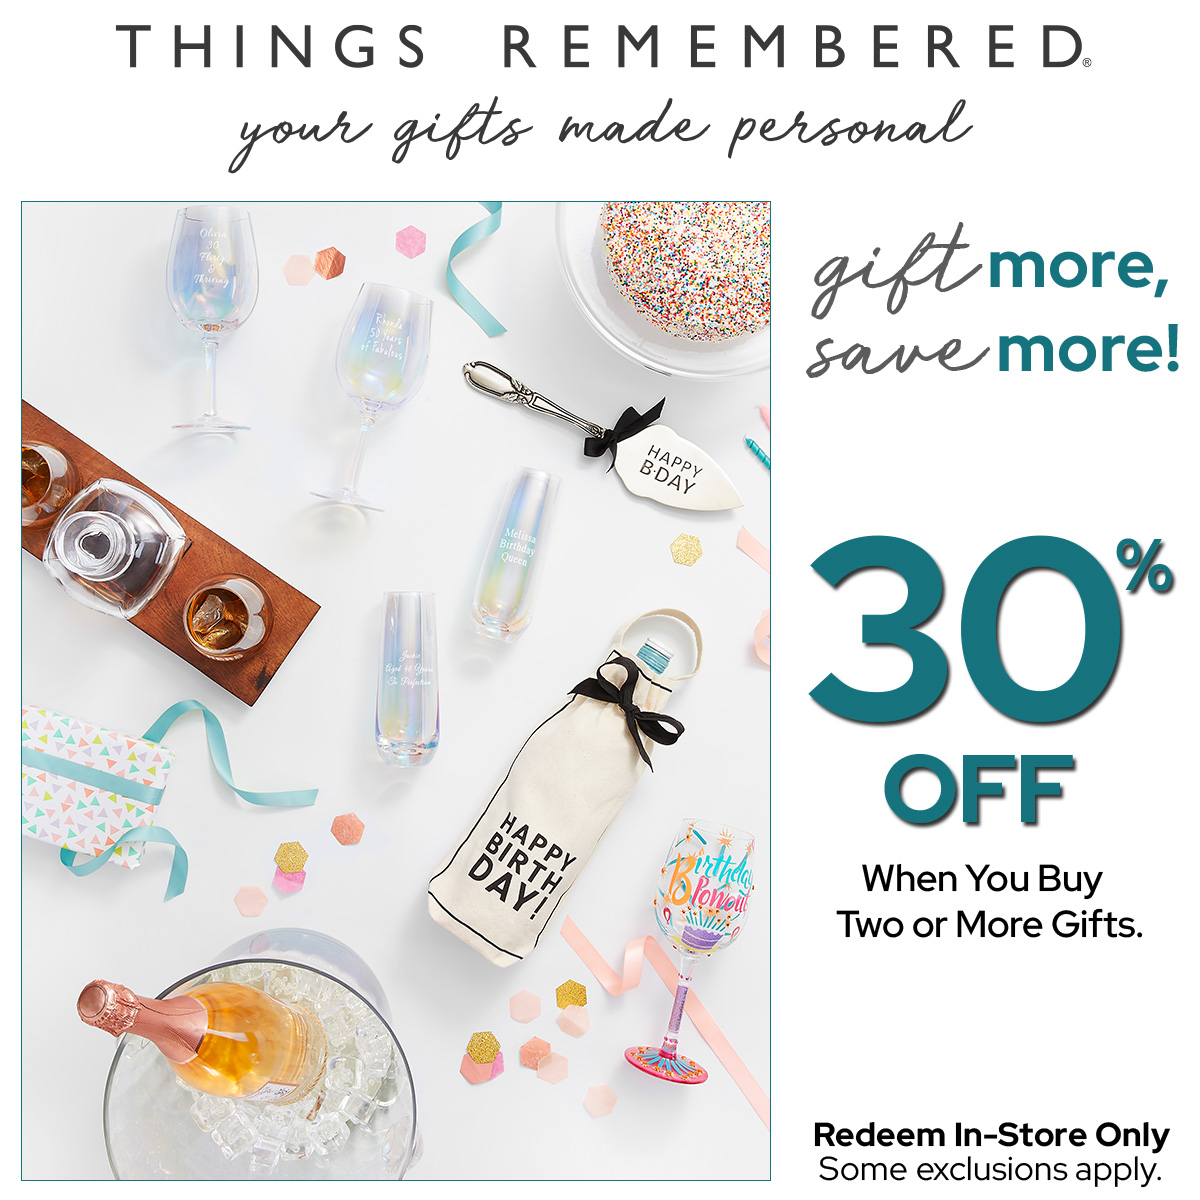  Things Remembered: your gifts made personal. 30% off when you buy more two or more gifts. Redeem in-store only. Some exclusions apply. 